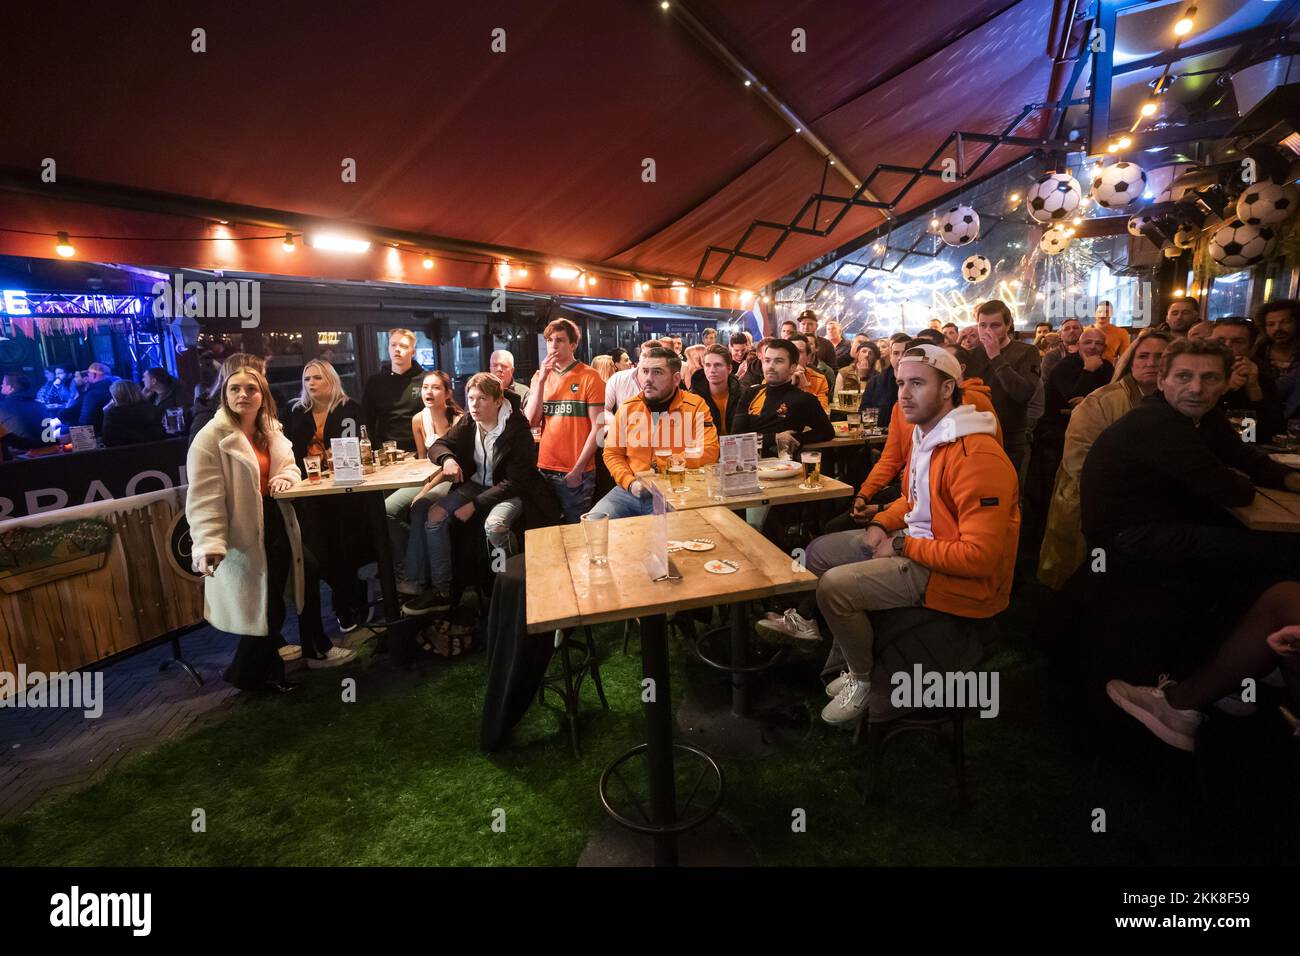 APELDOORN - Football fans watch the game between the Netherlands and Ecuador in a cafe. It was the second game of the Dutch national team at the World Cup in Qatar. ANP JEROEN JUMELET netherlands out - belgium out Credit: ANP/Alamy Live News Stock Photo